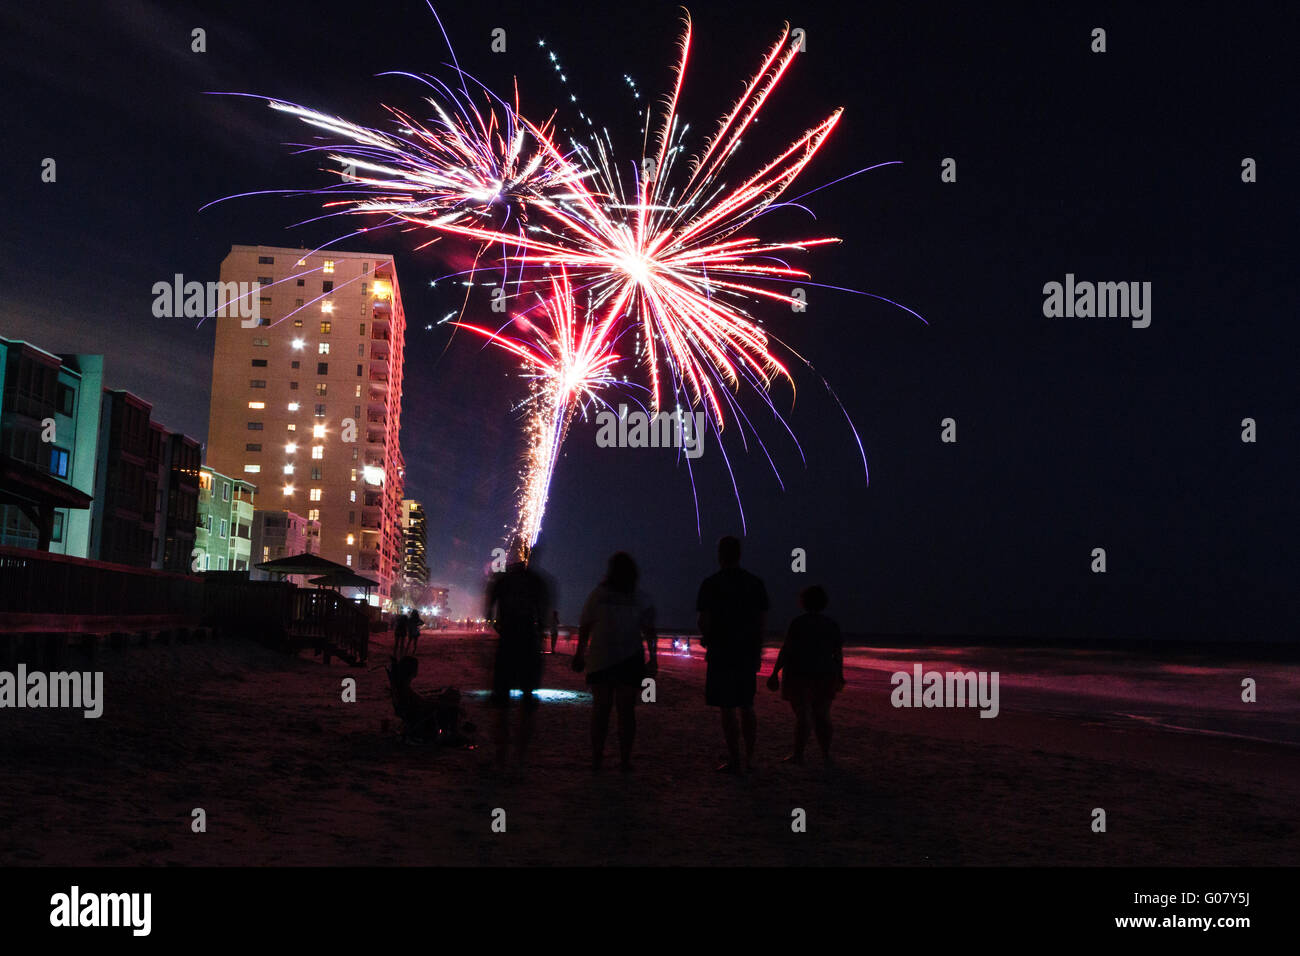 People stop to watch as a colorful amateur fireworks display breaks up the dark night sky on the beach in Garden City, SC. Stock Photo